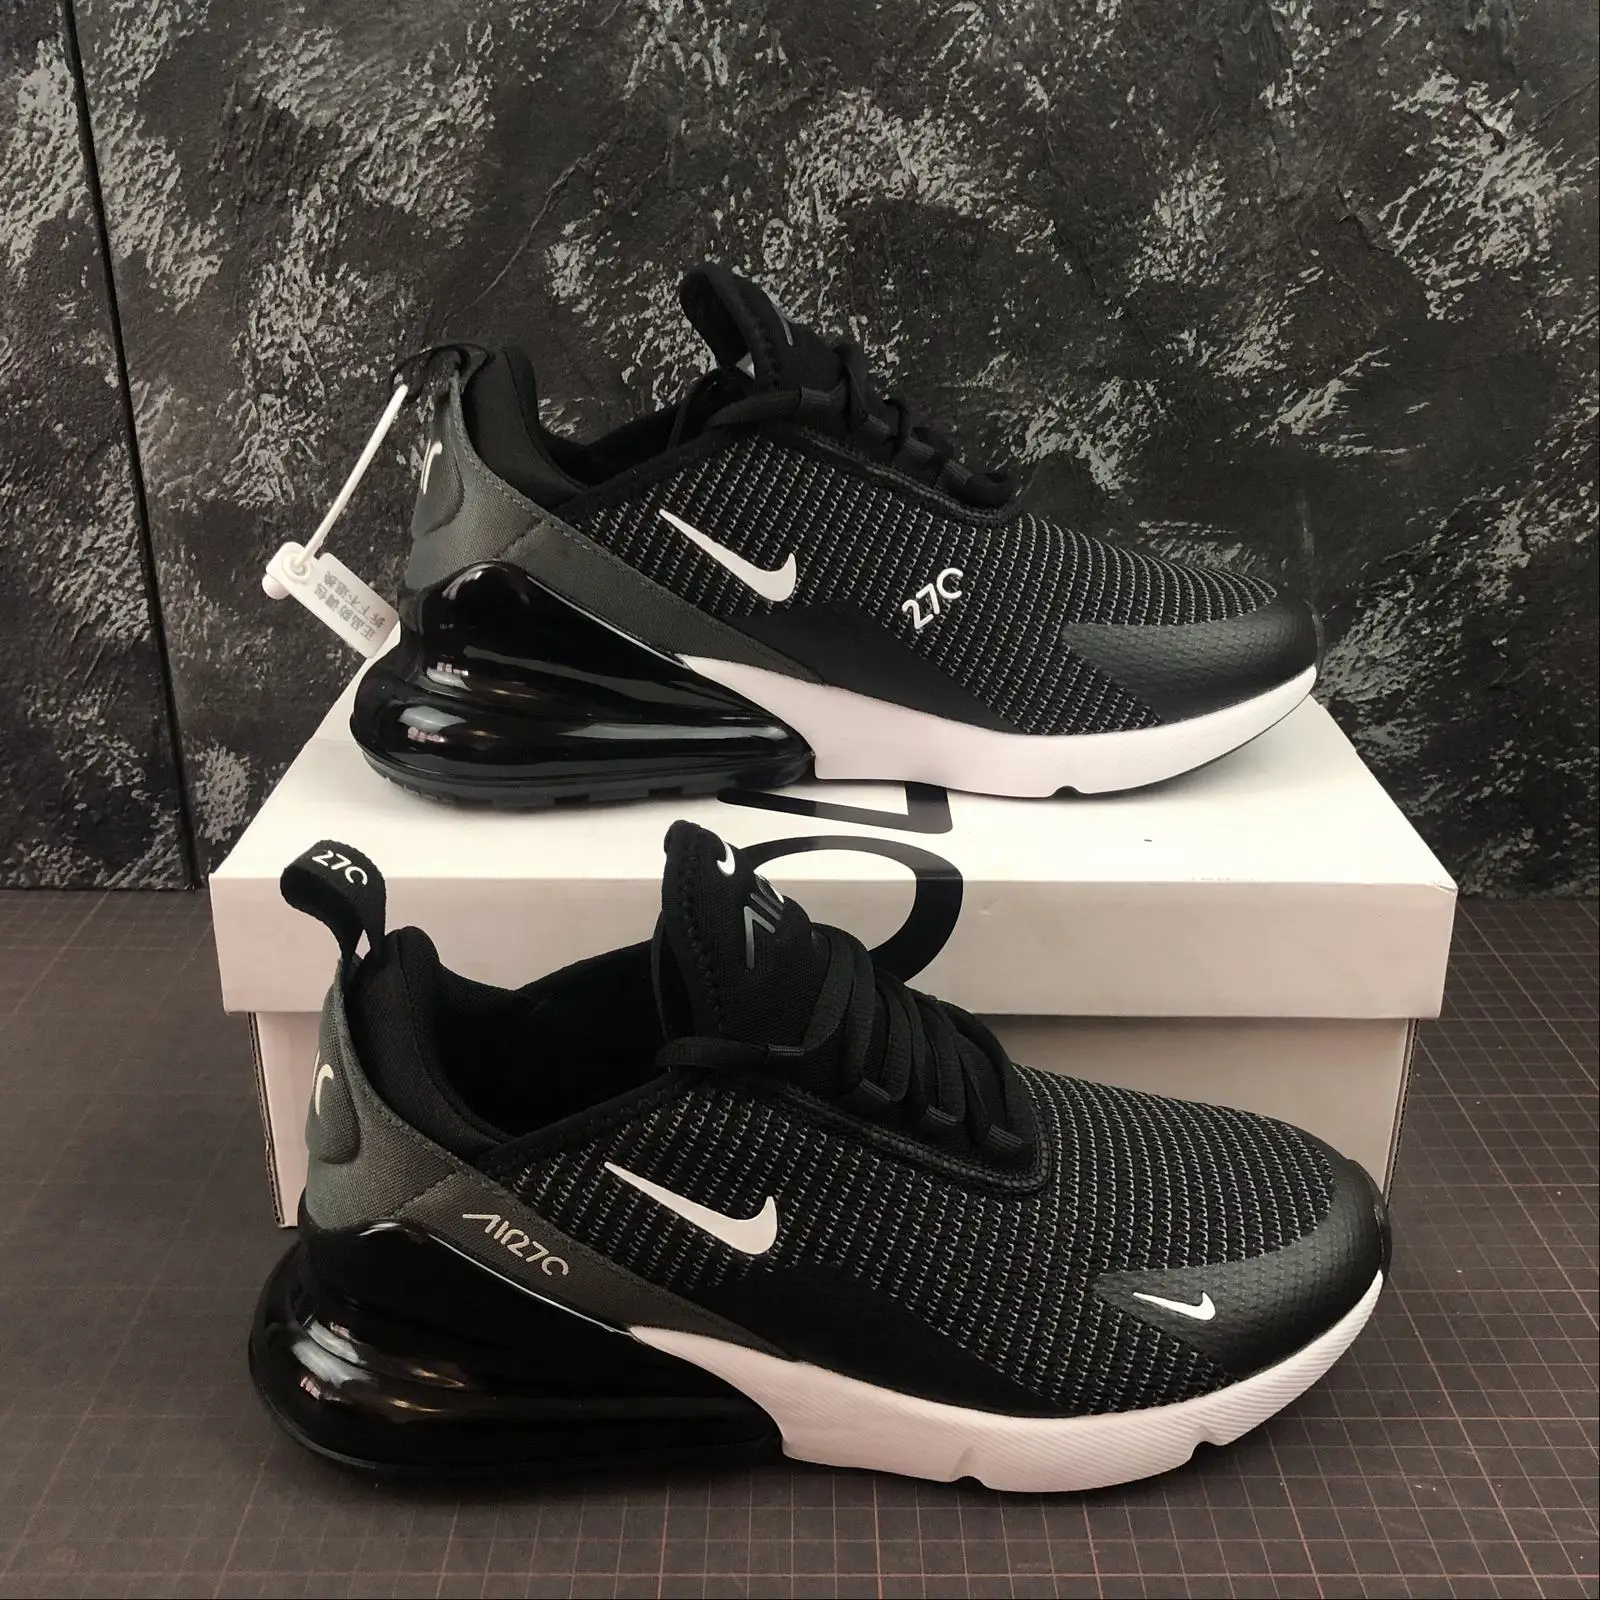 

2021 New design Nike nike air max 270 SE Causal shoes Men's Fashion walking style Outdoor Sports Running tennis Nike shoes